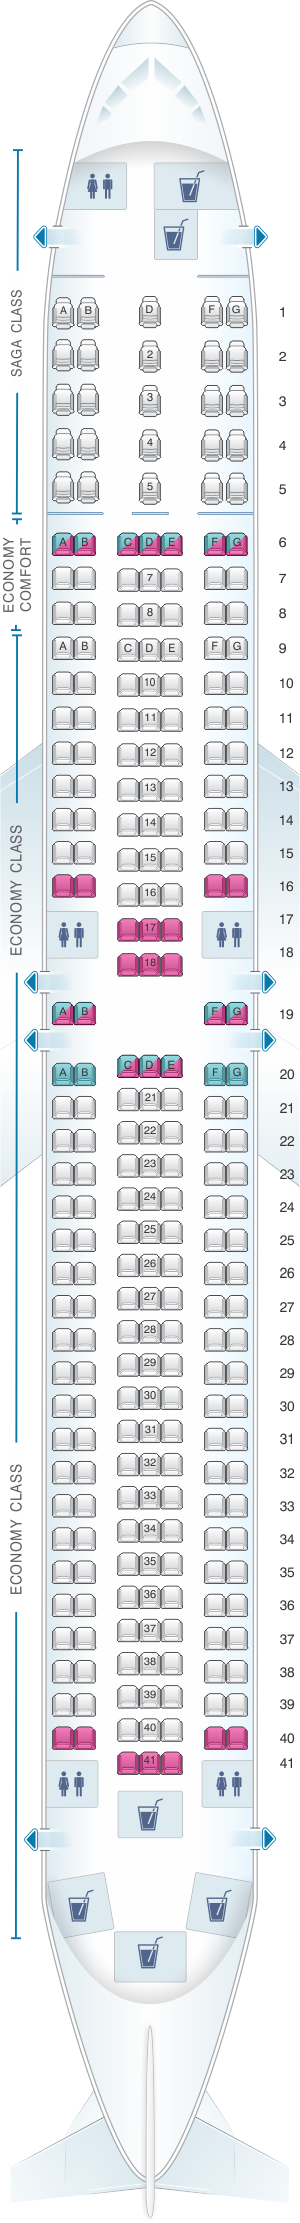 Boeing 767 Seating Chart